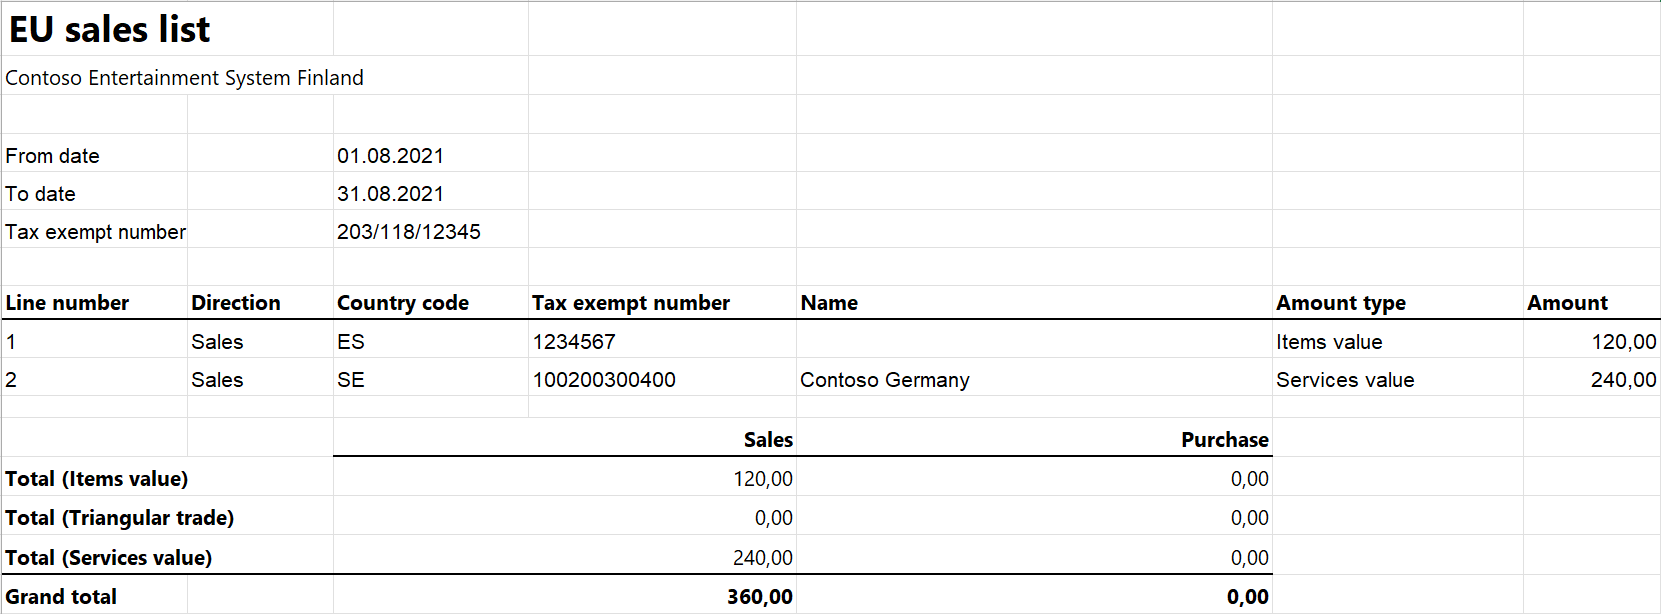 EUSL report for Finland in Excel format.